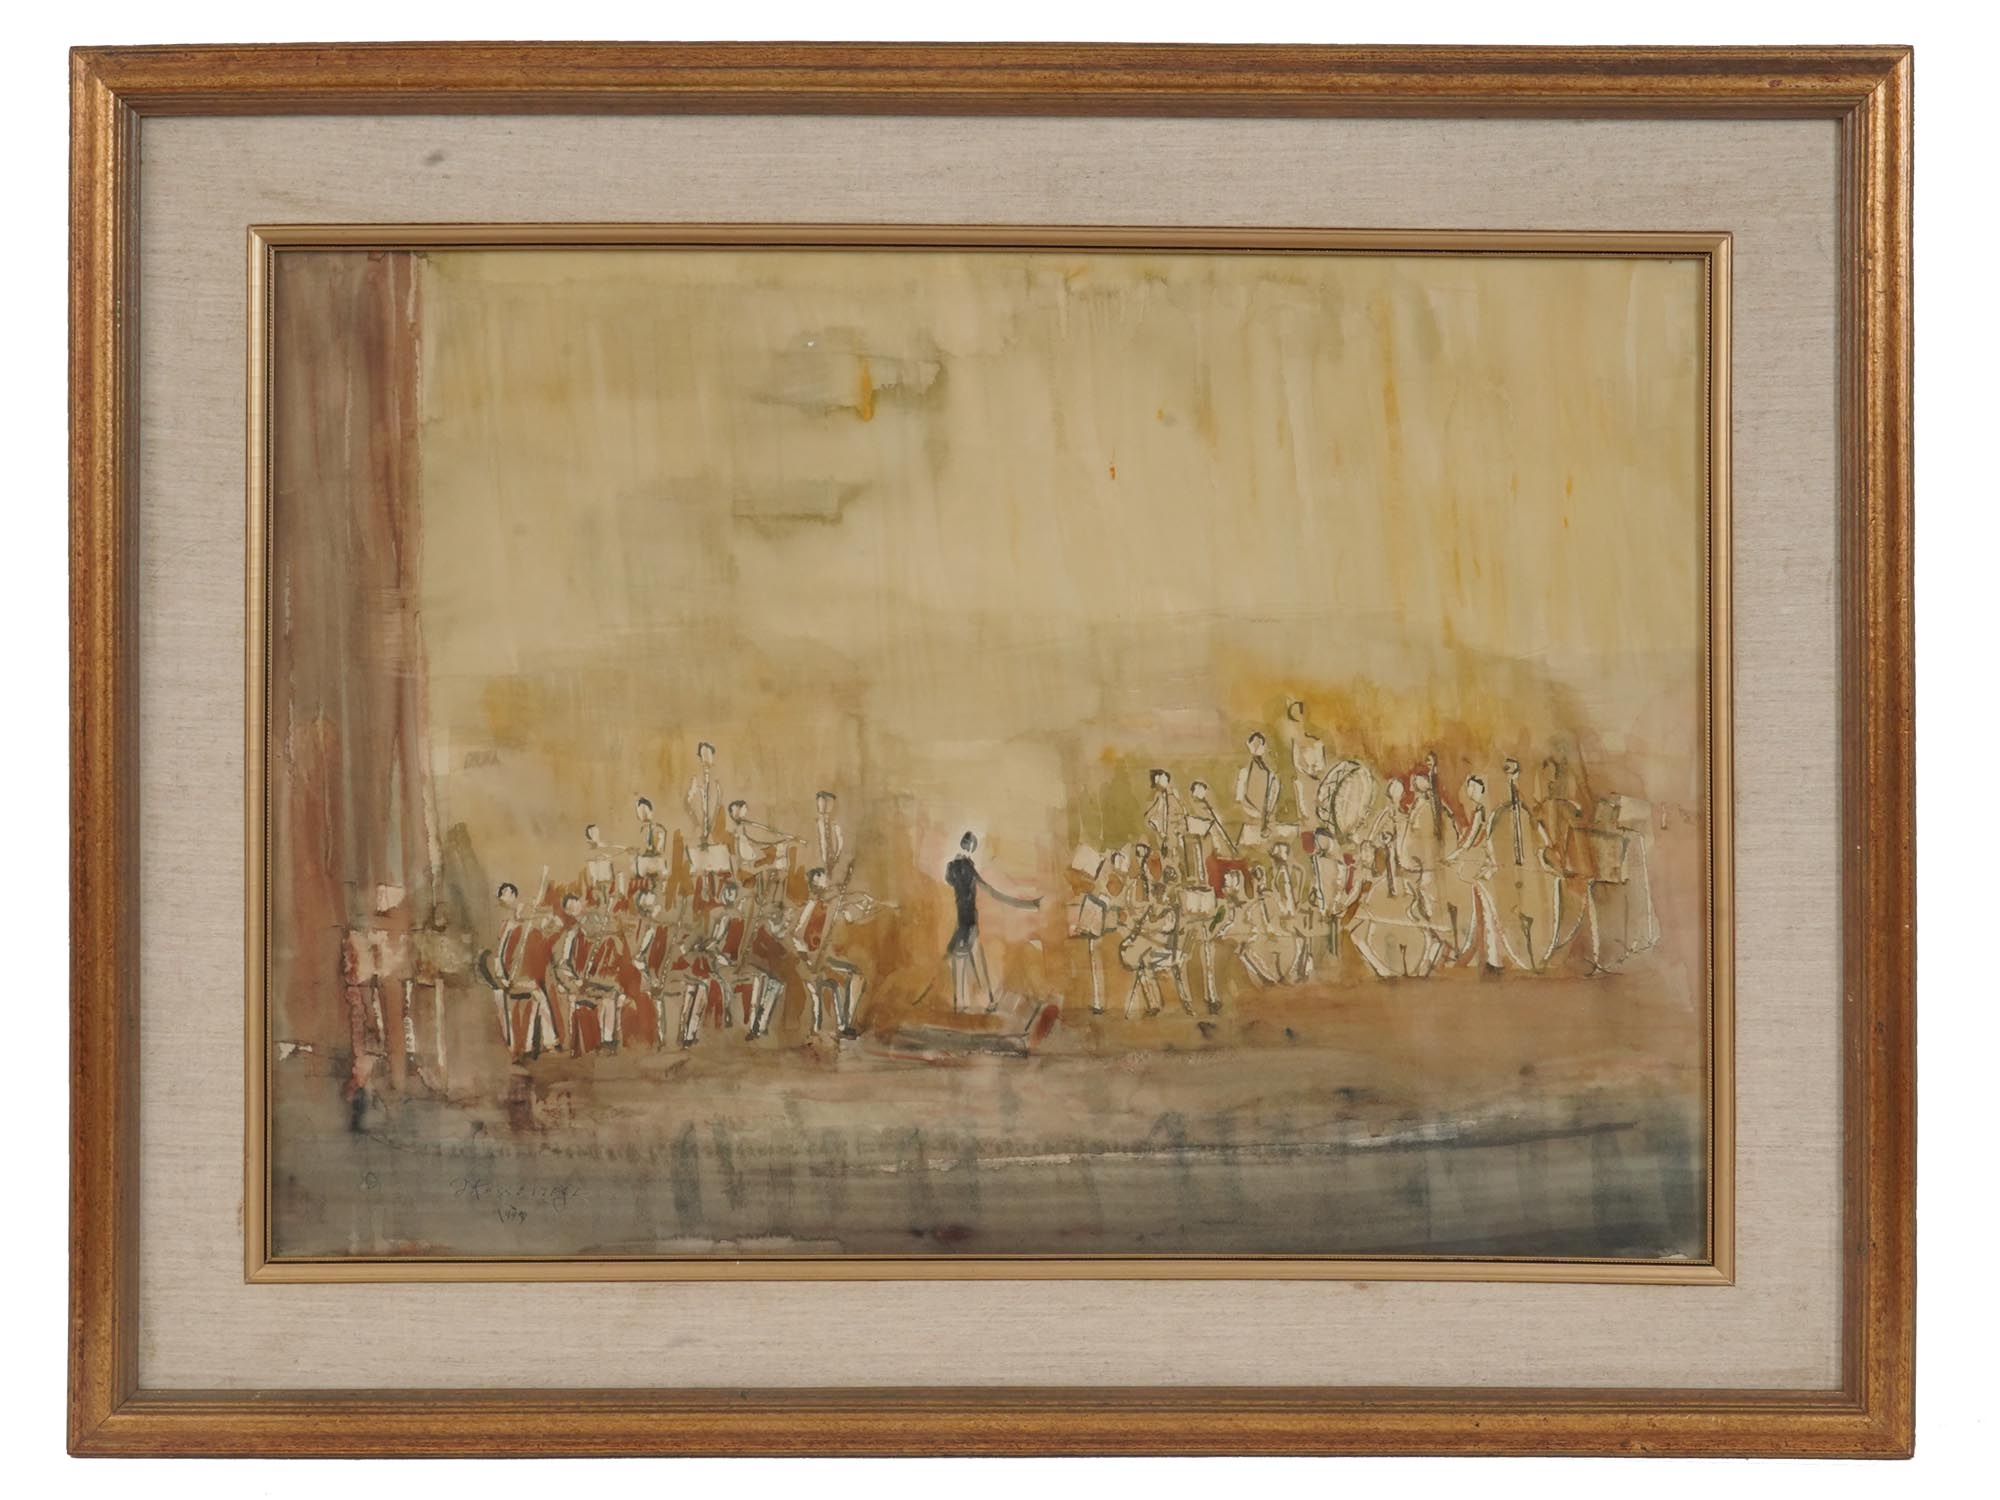 WATERCOLOR PAINTING OF ORCHESTRA SIGNED KOSSONOGI